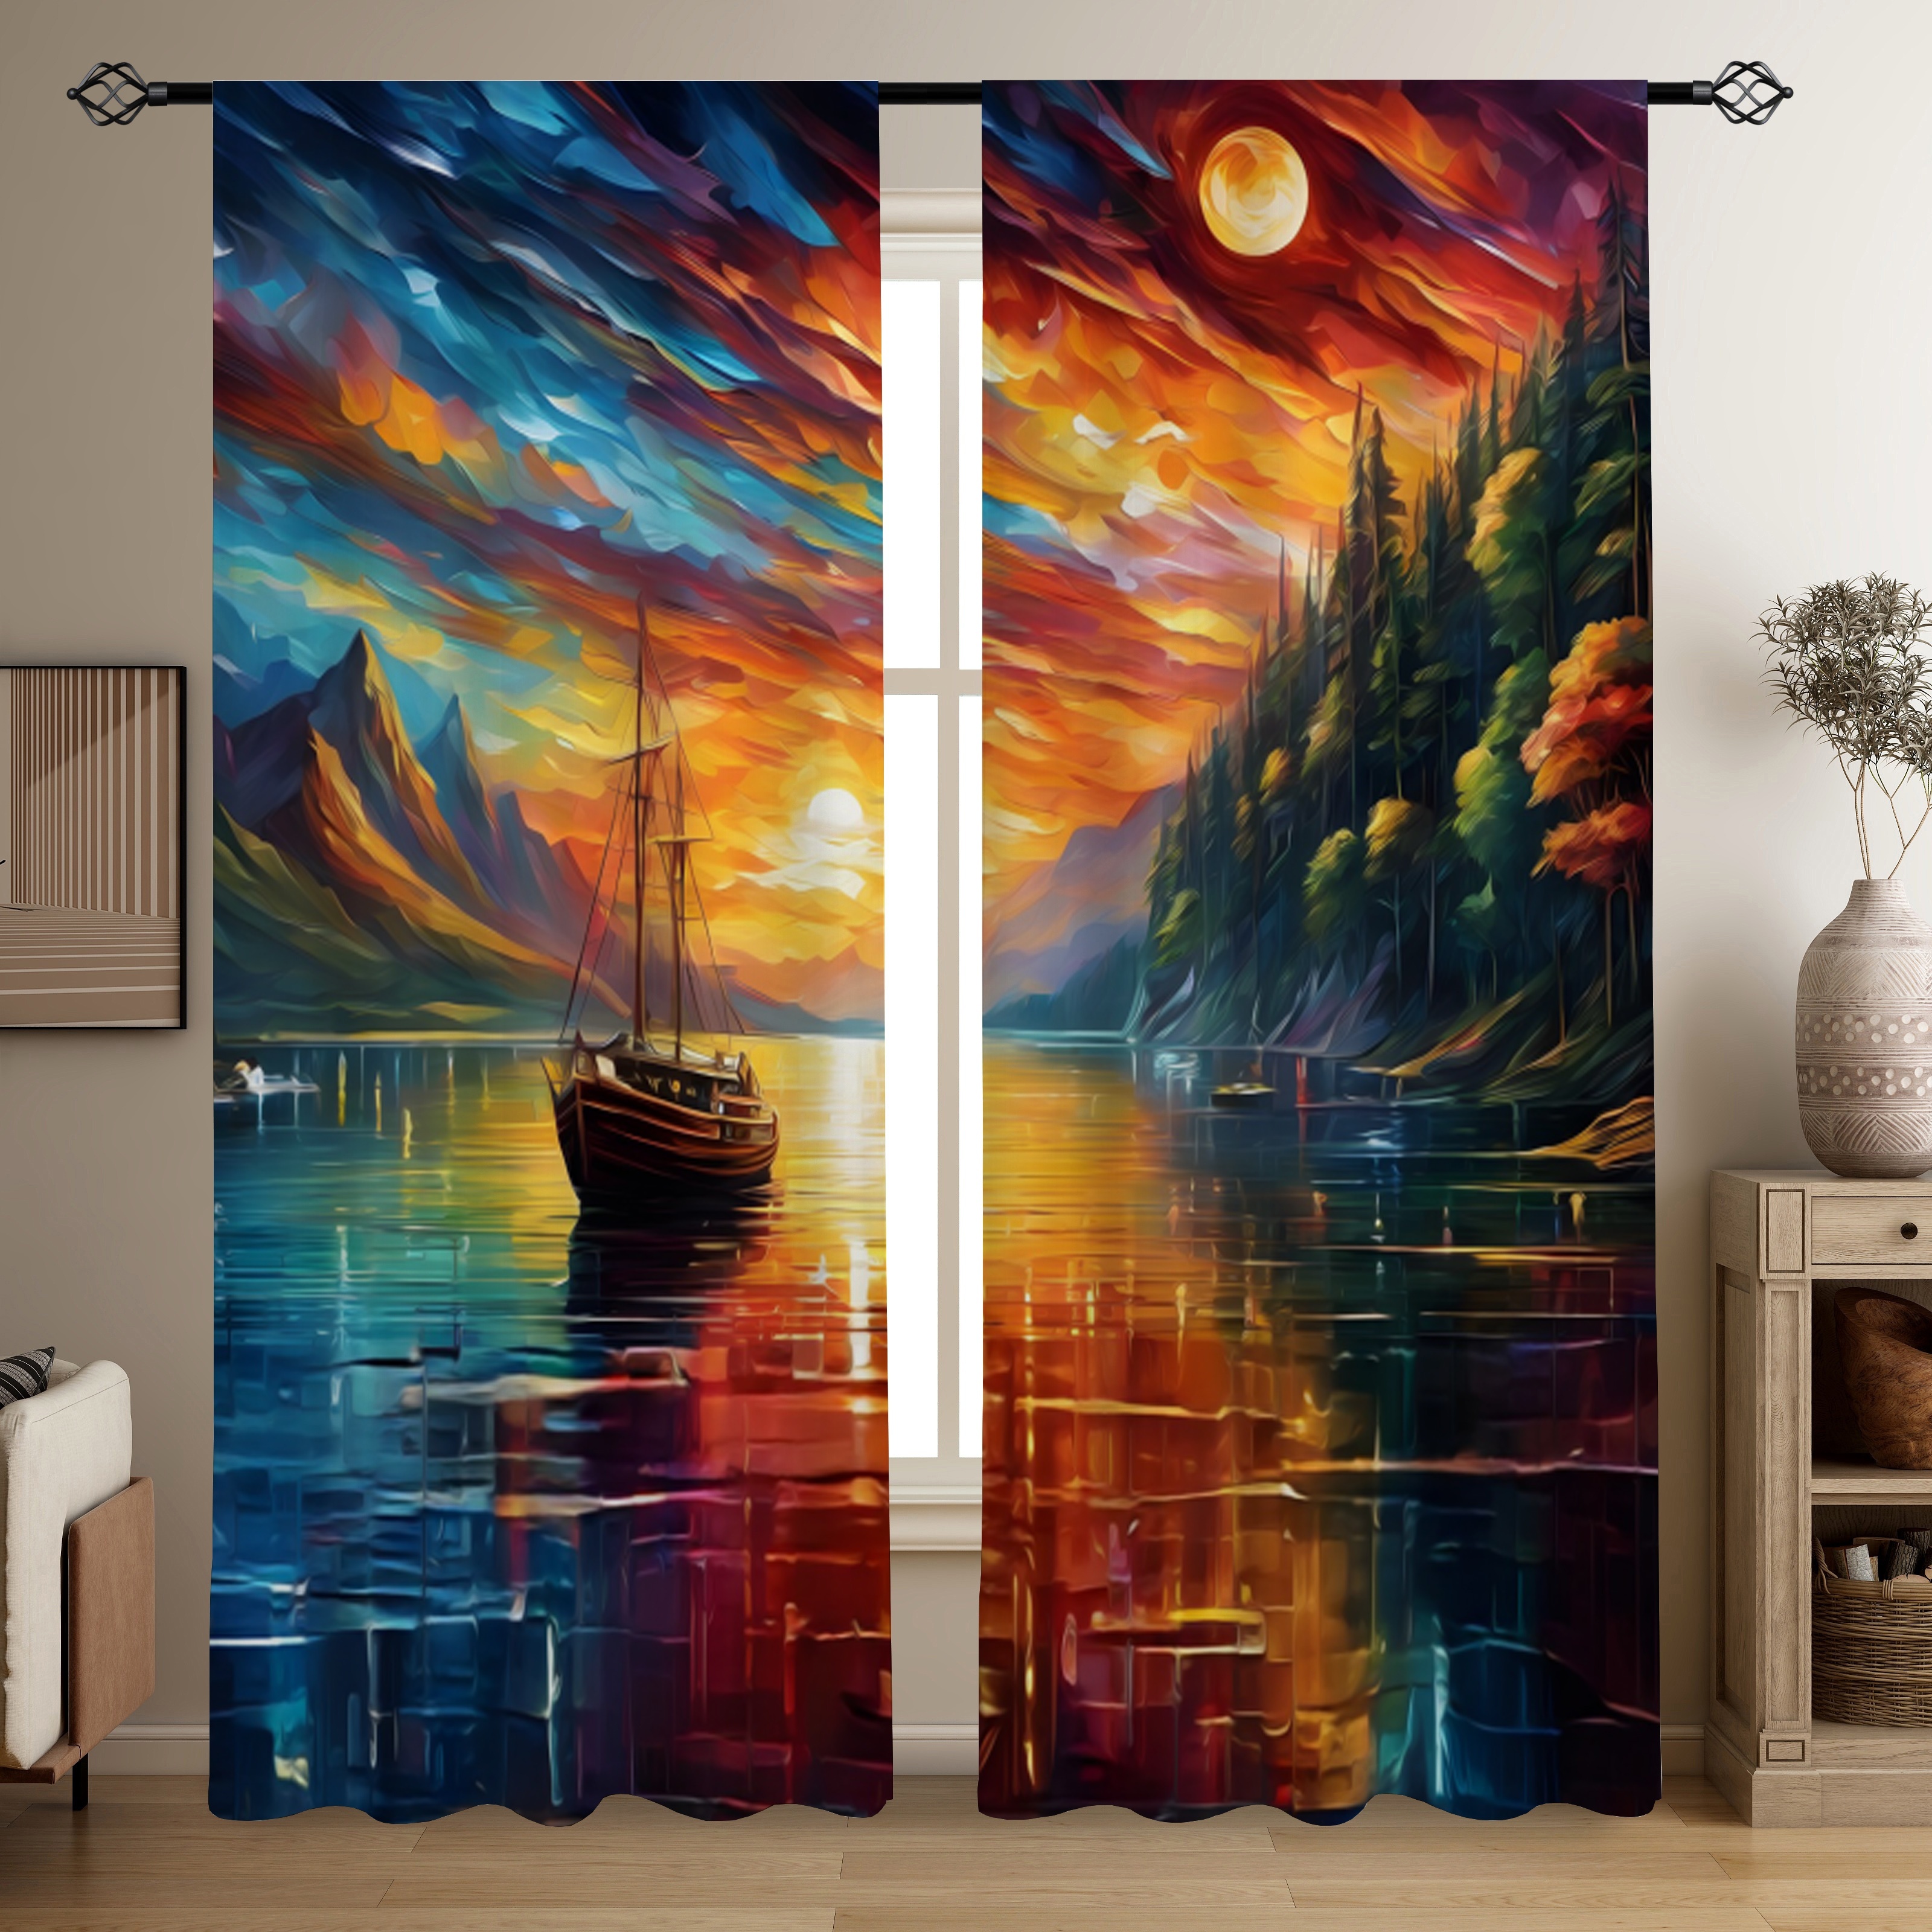 

2pcs, Oil Painting Sunset Printed Translucent Curtains, Multi-scene Polyester Rod Pocket Decorative Curtains For Living Room Game Room Bedroom Home Decor Party Supplies